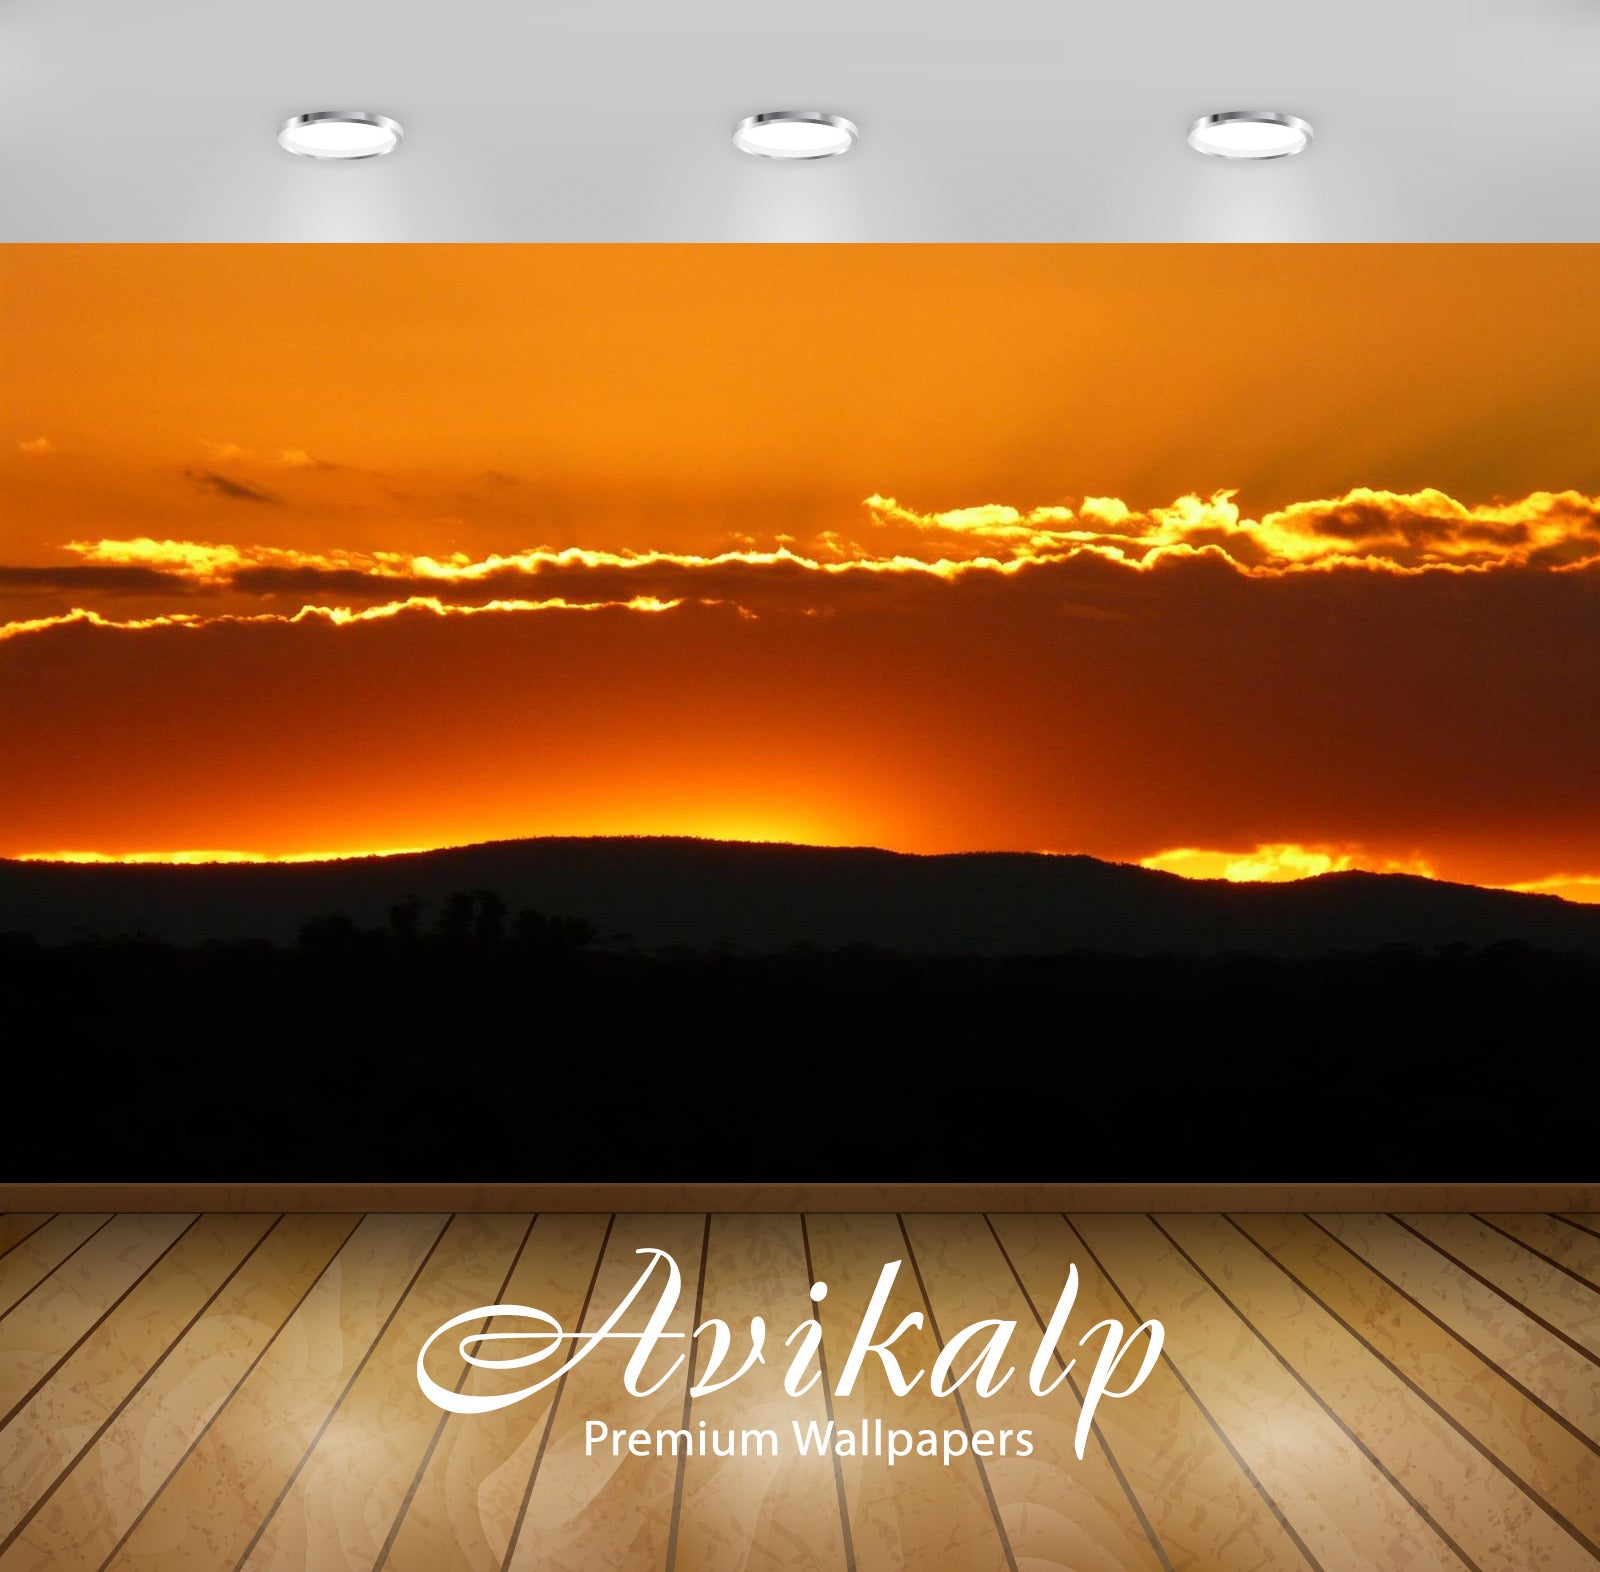 Avikalp Exclusive Awi1468 Sunset Full HD Wallpapers for Living room, Hall, Kids Room, Kitchen, TV Ba